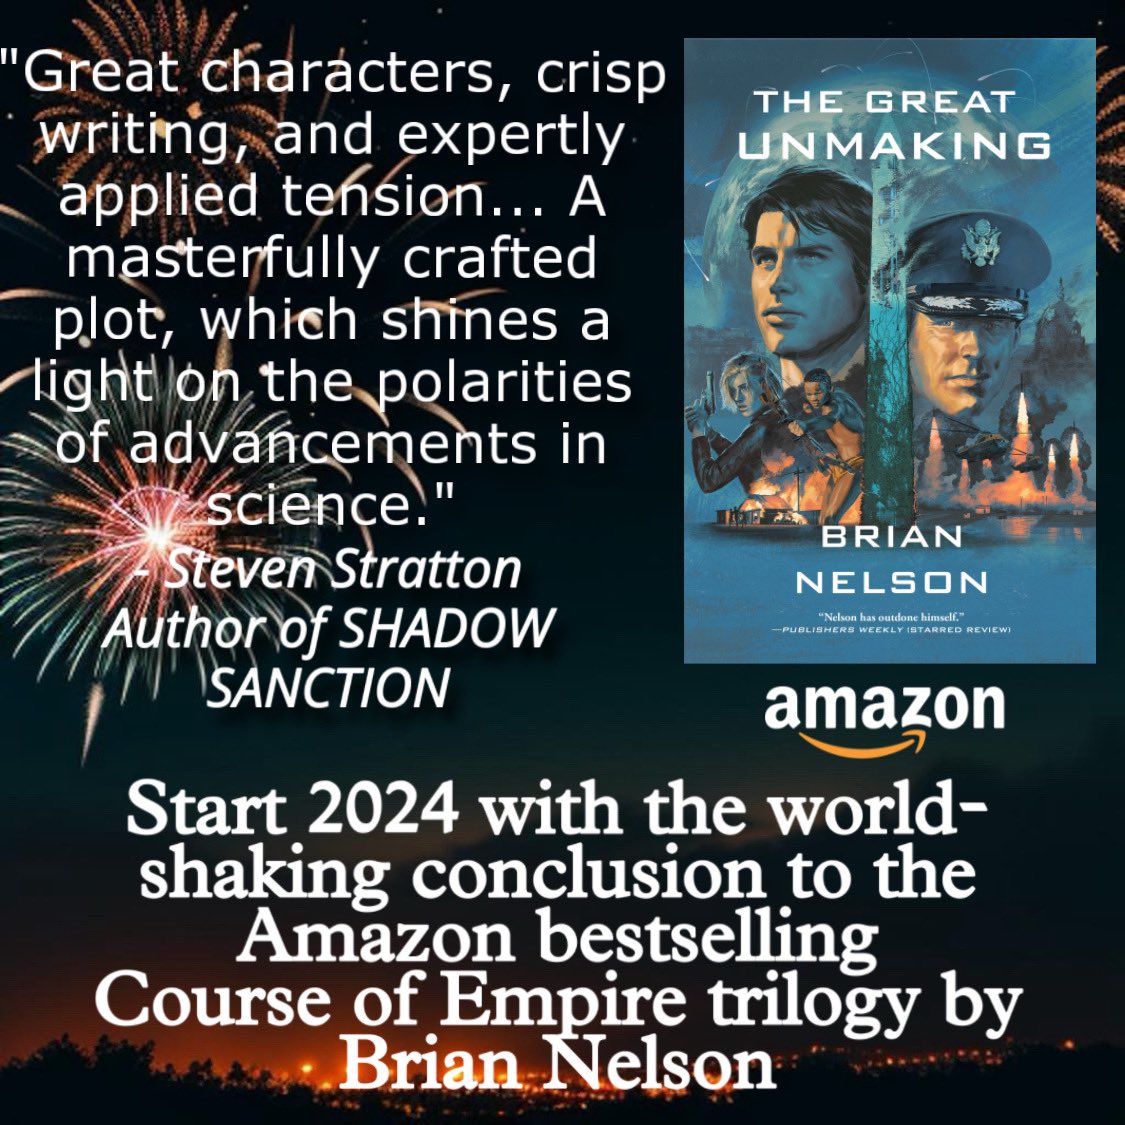 Climactic conclusion to #bestselling COURSE OF EMPIRE #thrillerseries is here from @BlackstoneAudio. All 3 including latest THE GREAT UNMAKING avail now. New readers start here w/Book 1 THE LAST SWORD MAKER: a.co/d/6aoQaWL

Big thanks to @strattonbooks for his support!